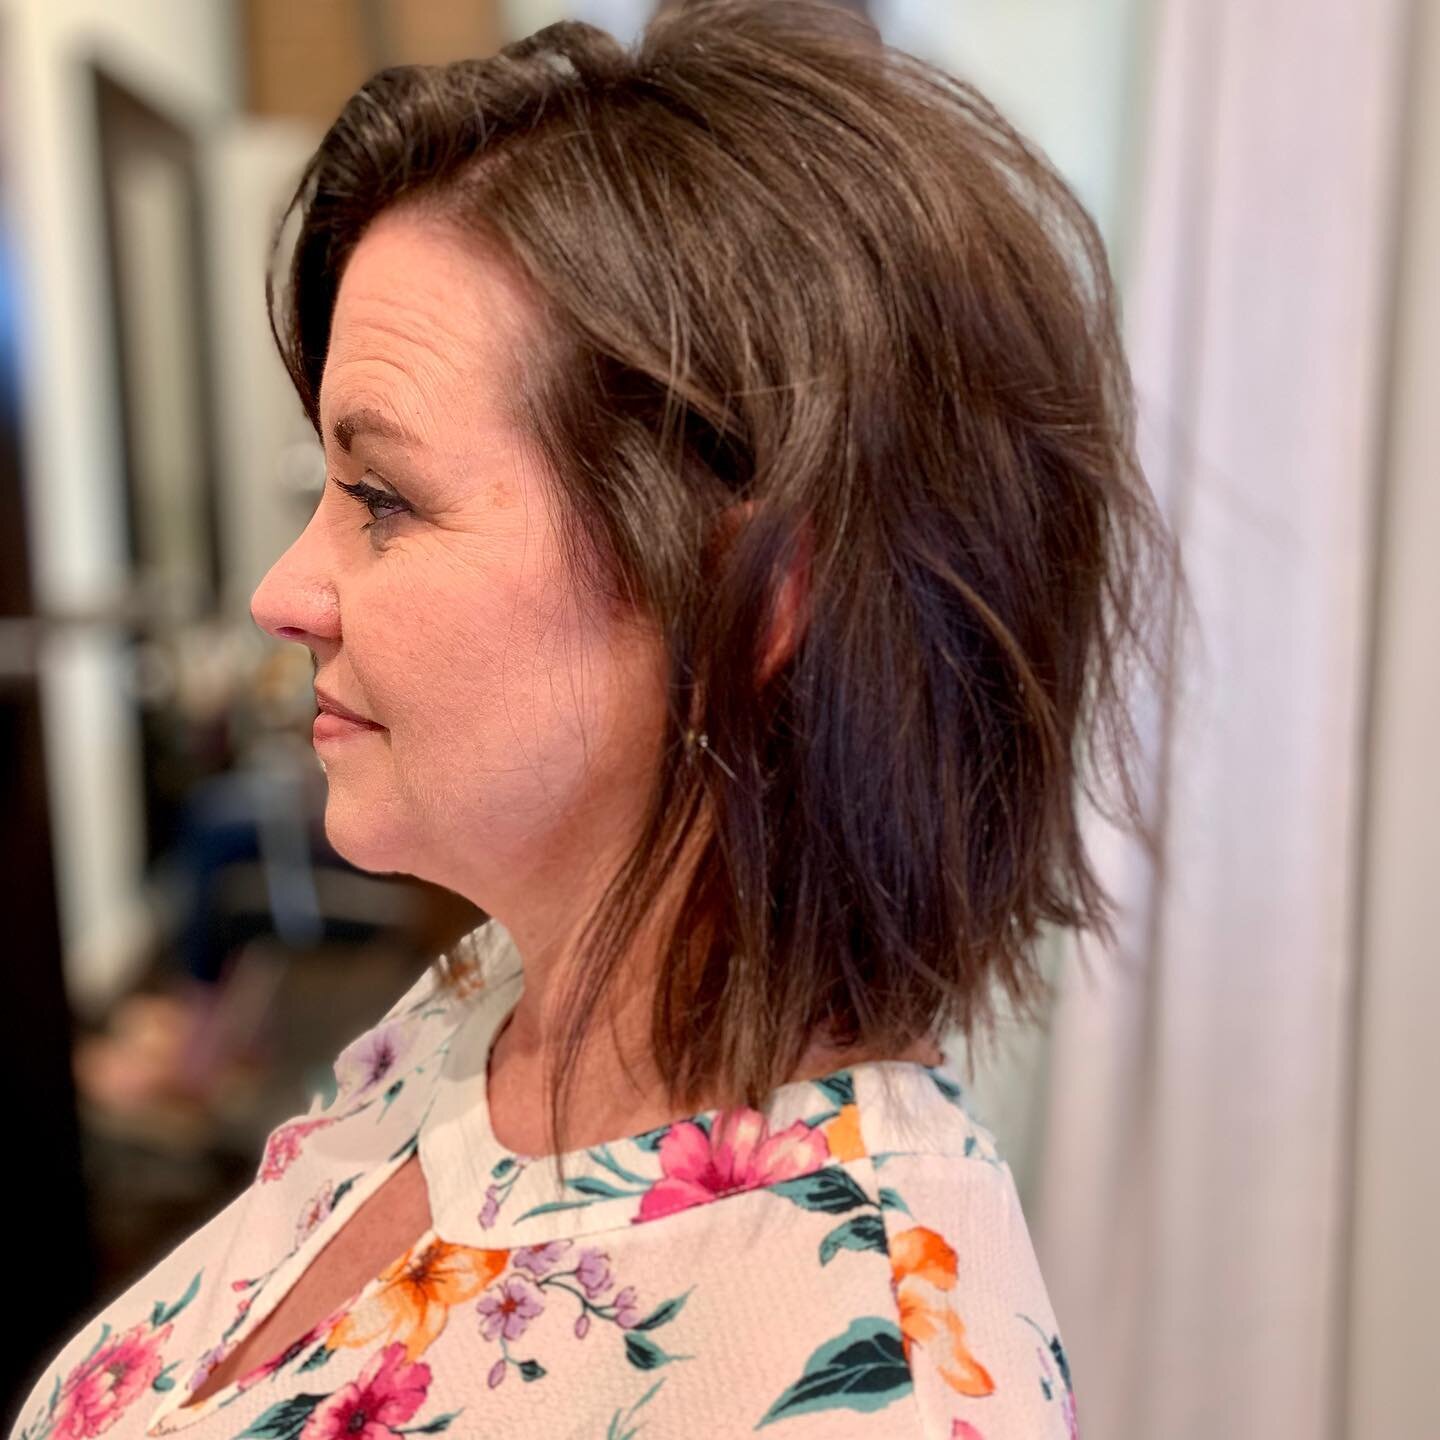 One of my sweetest clients got a major makeover! Took her look to another level. 🔥 .
.
#haircut #longbob #wella #texture #beforeandafter #austinstylist #atxstylist #atxhair